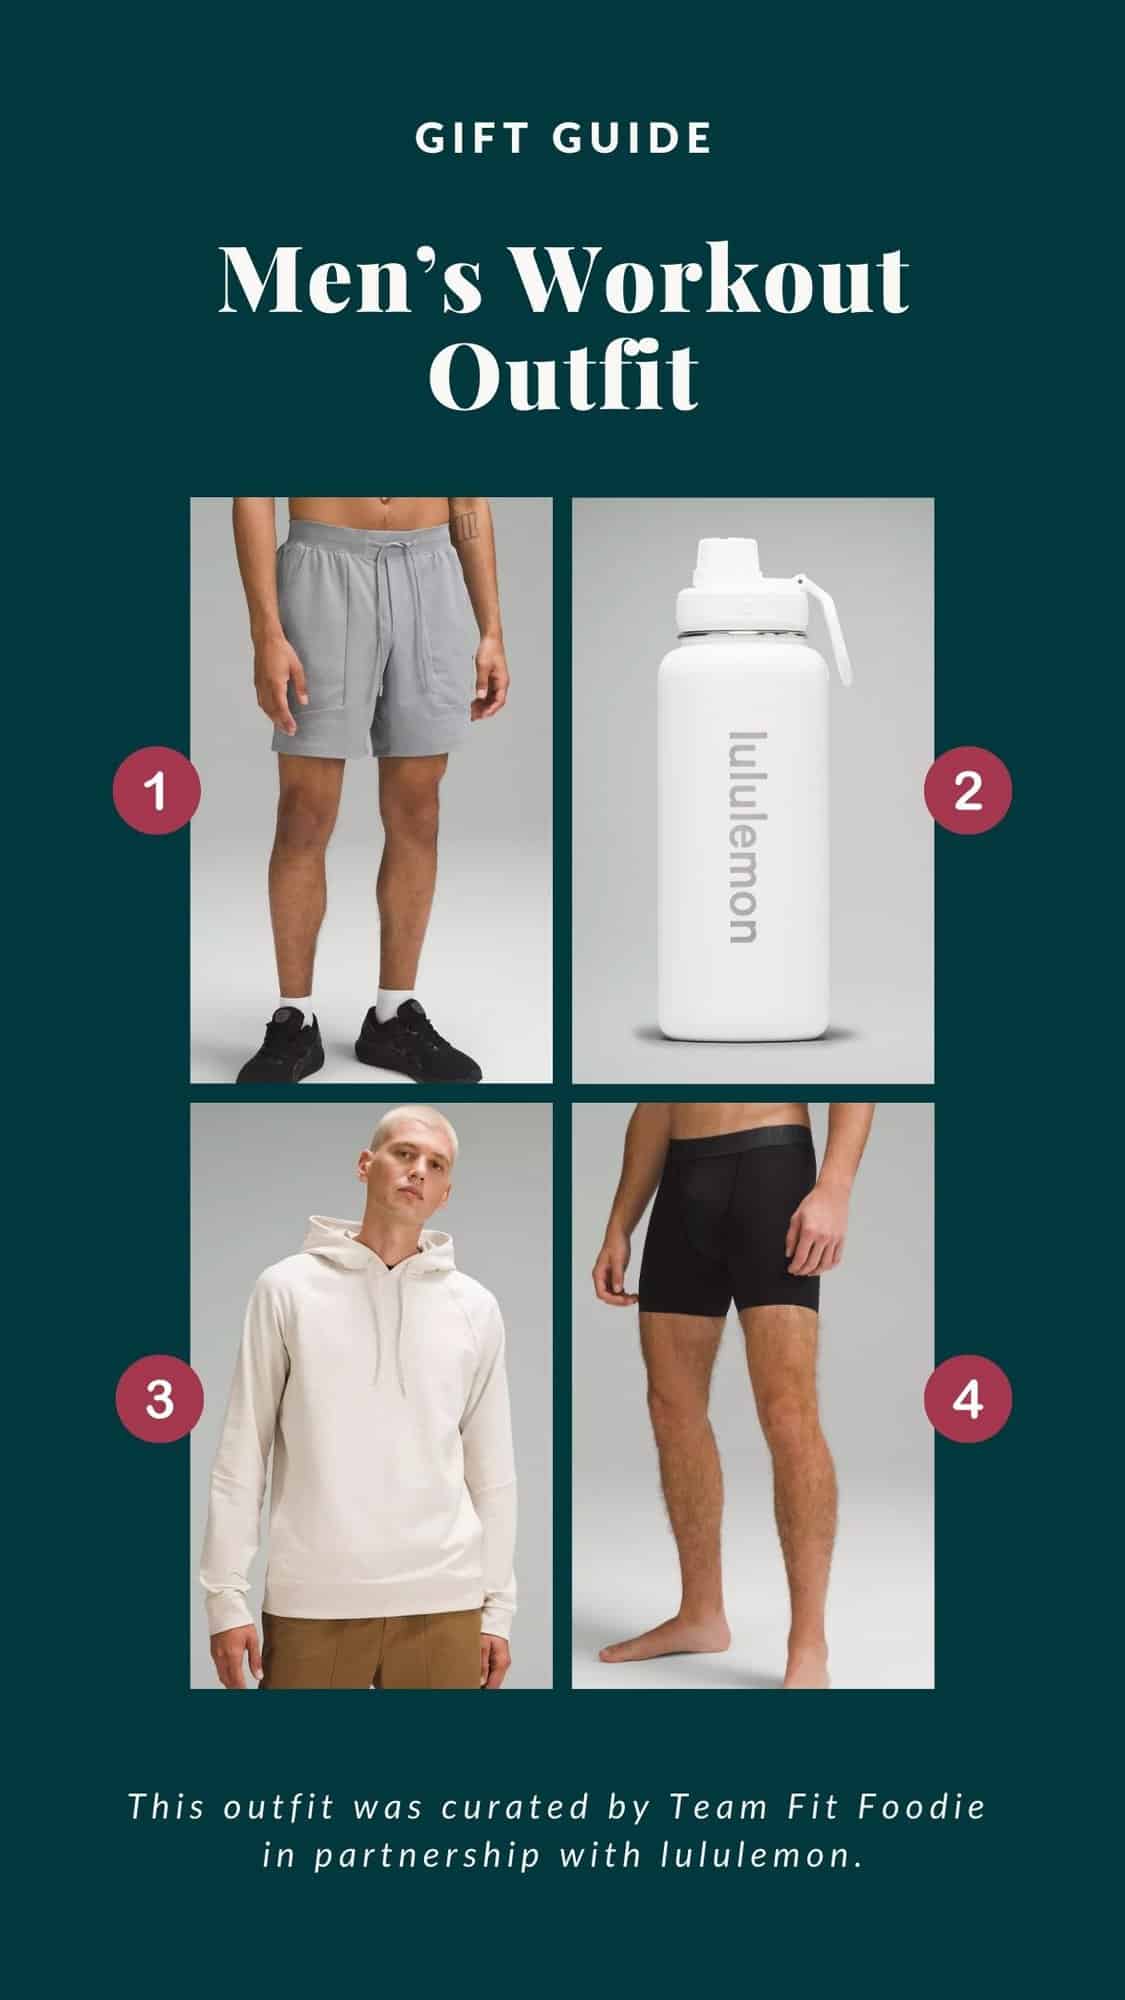 Men's workout outfit gift guide.